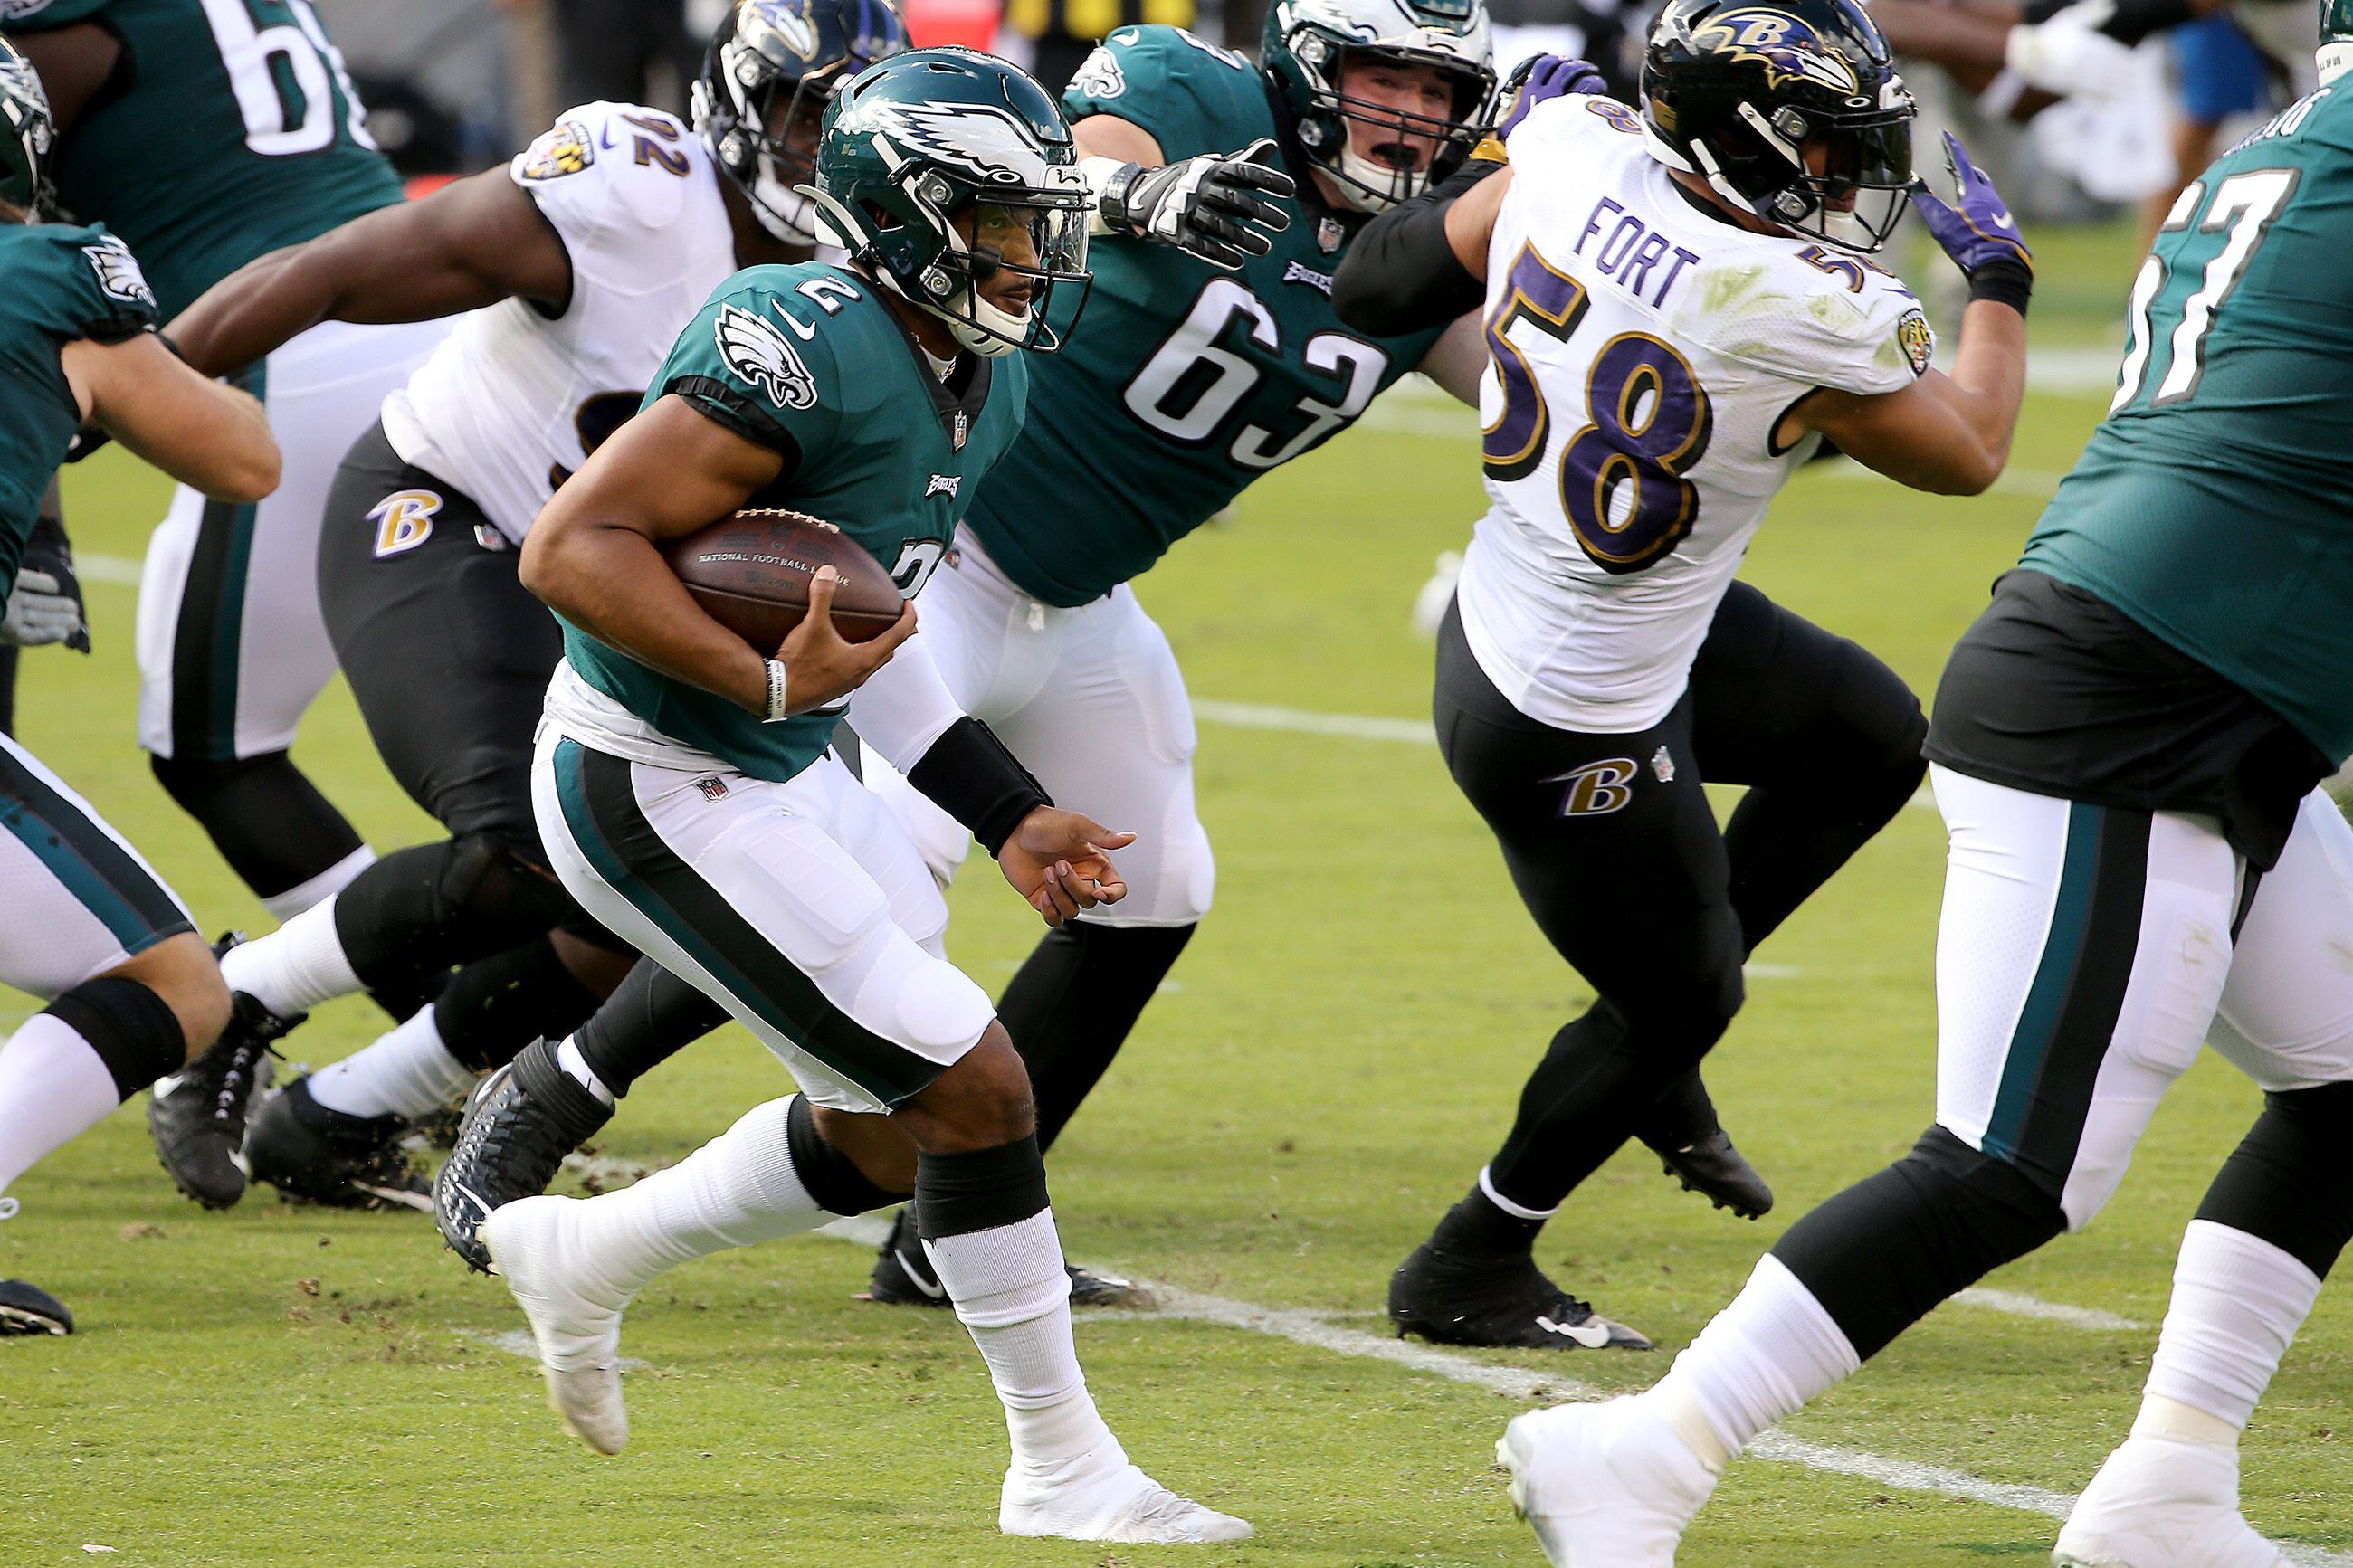 Eagles vs Jets: All you need to know ahead of preseason opener